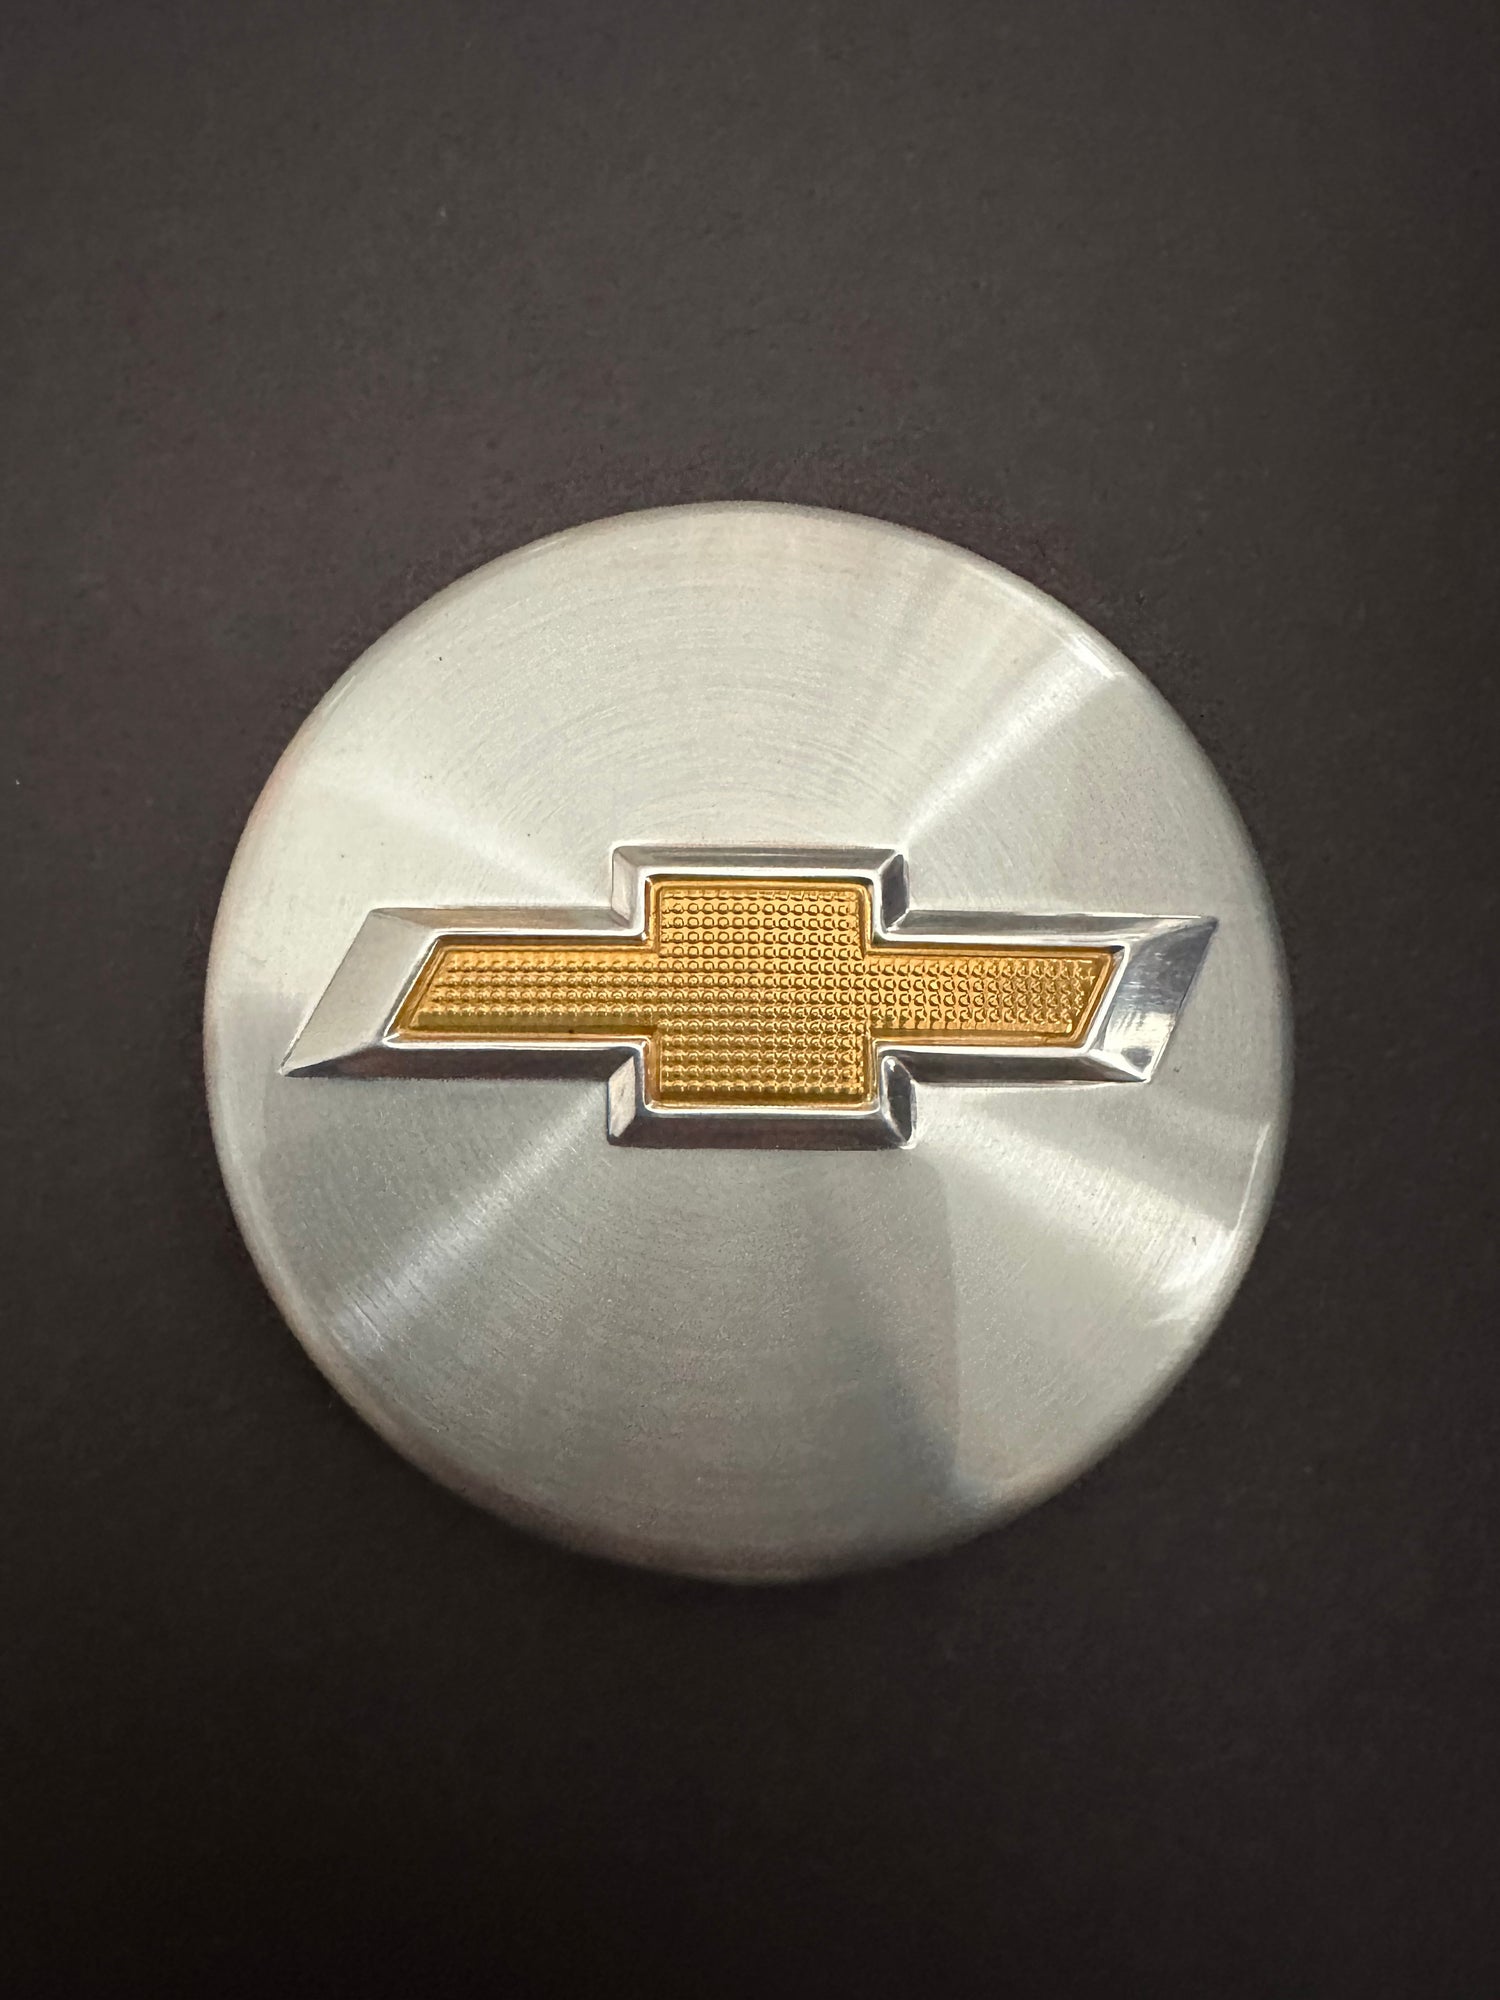 Stamped Aluminum Chevy Wheel Badge